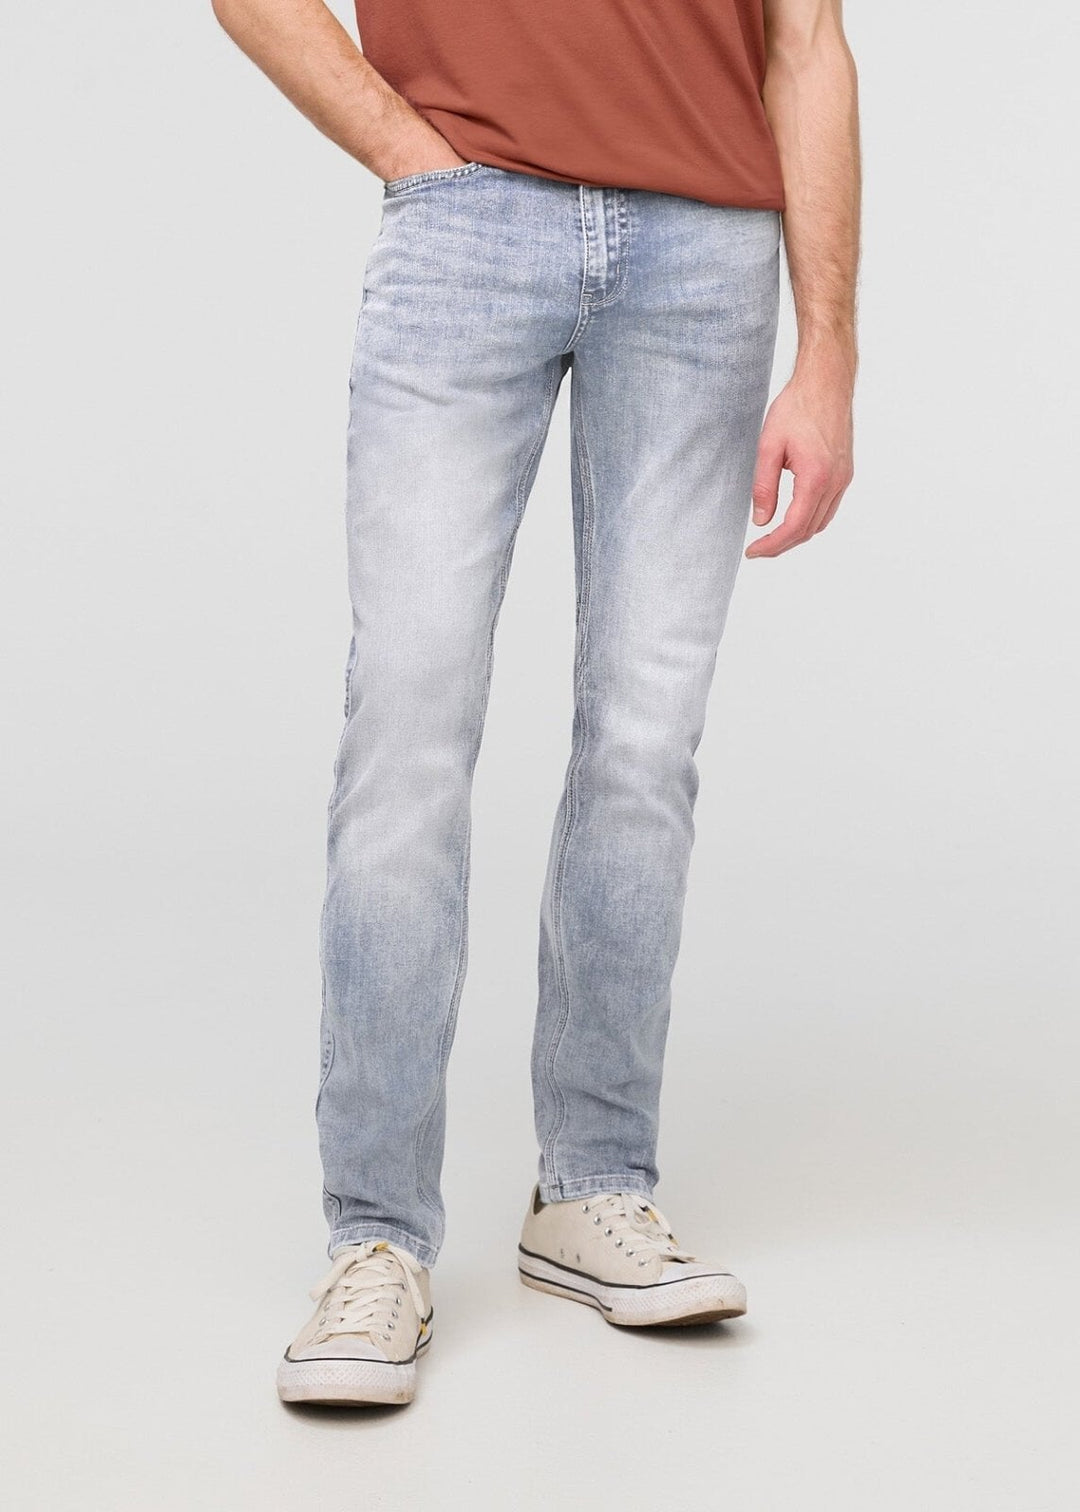 Five Ways to Style Performance Denim Jeans from Dish and Duer - Being Tazim